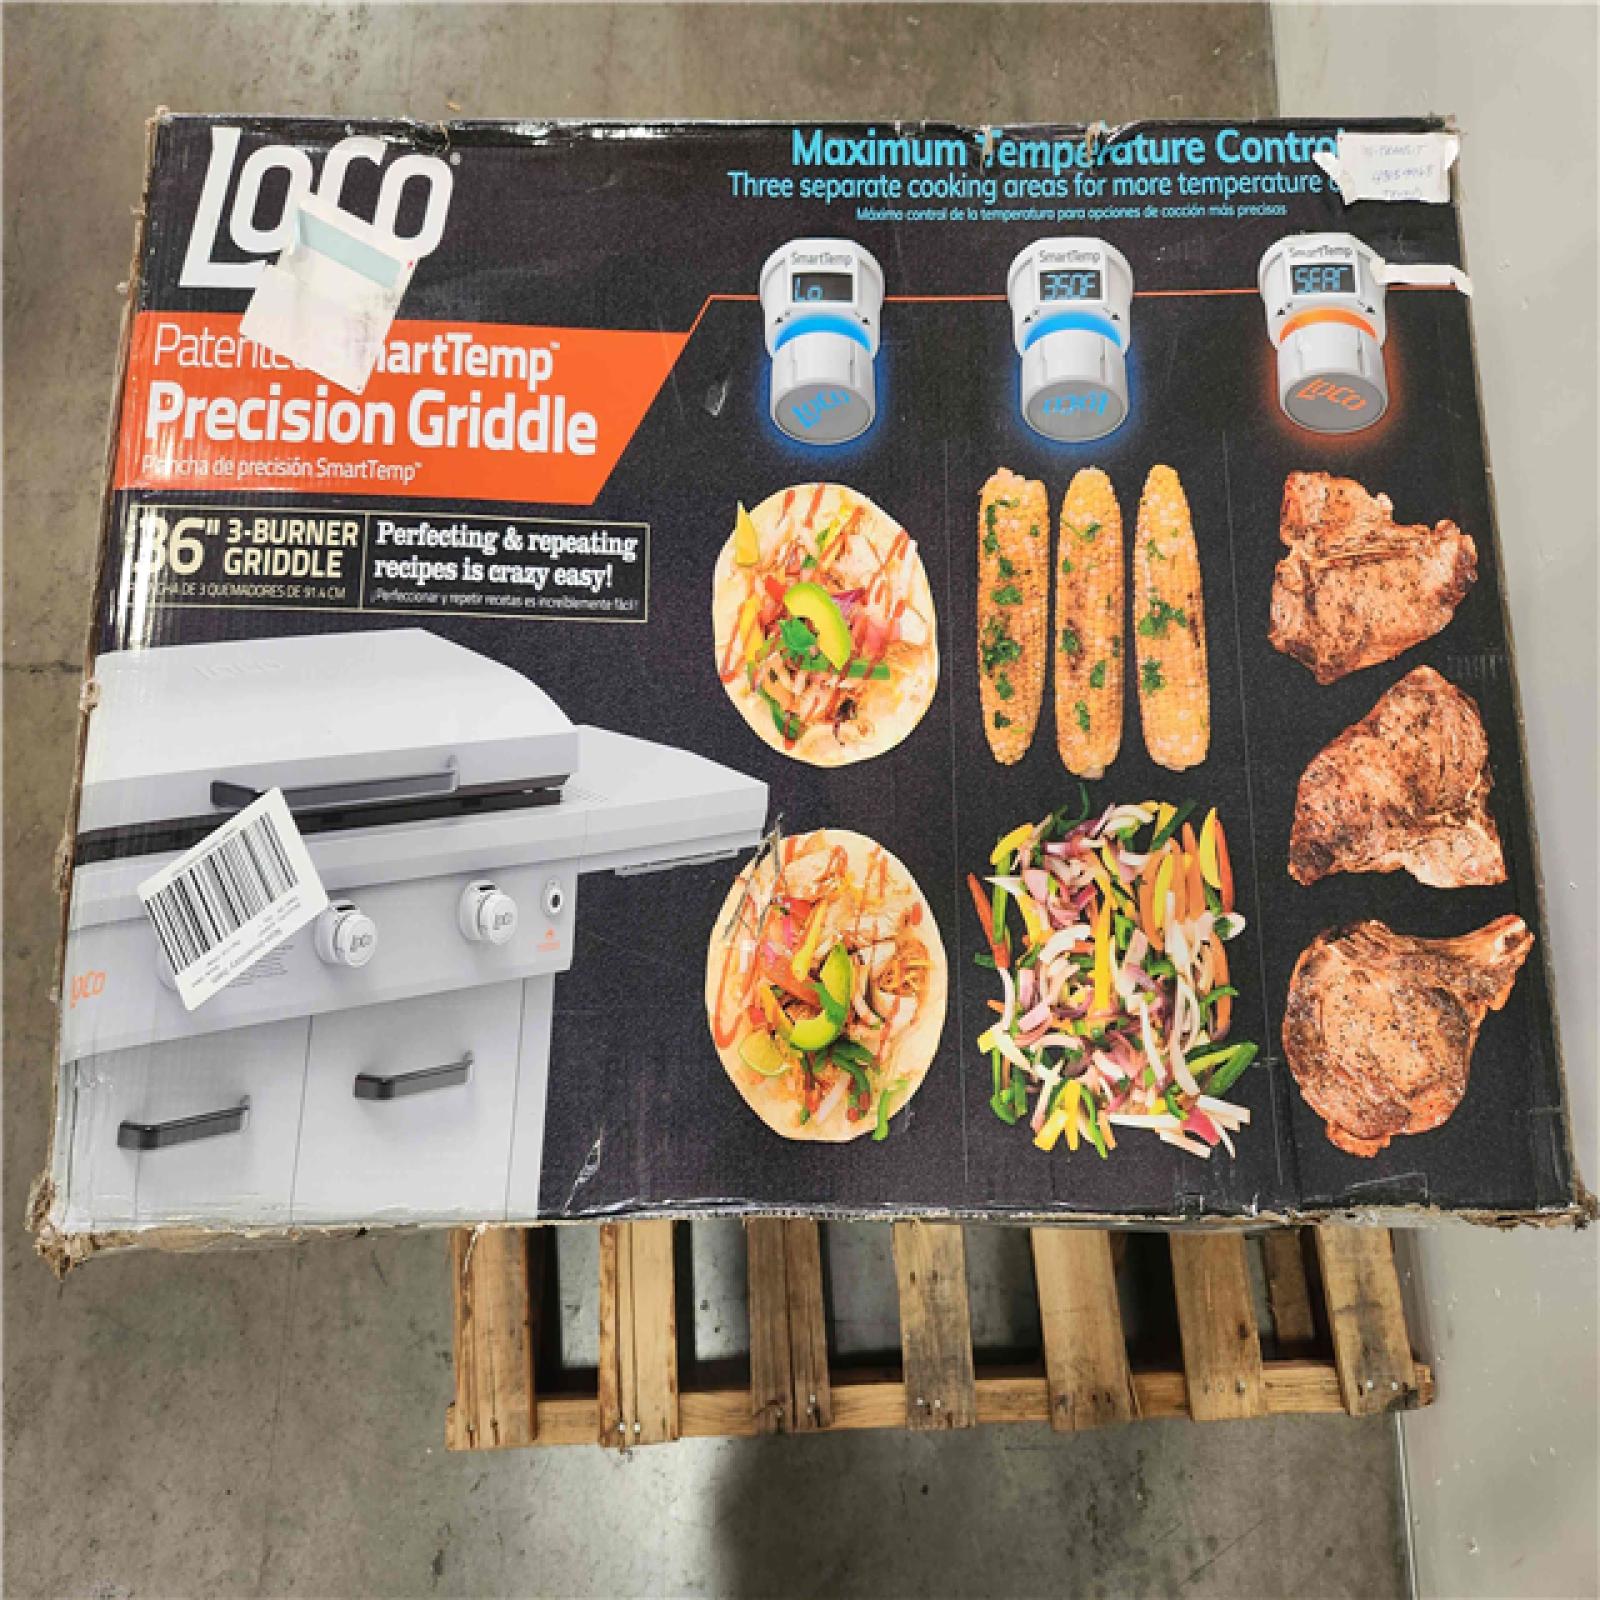 Phoenix Location NEW LOCO Series II 36 in. 3-Burner Digital Propane SmartTemp Flat Top Grill / Griddle in Chalk Finish with Enclosed Cart and Hood